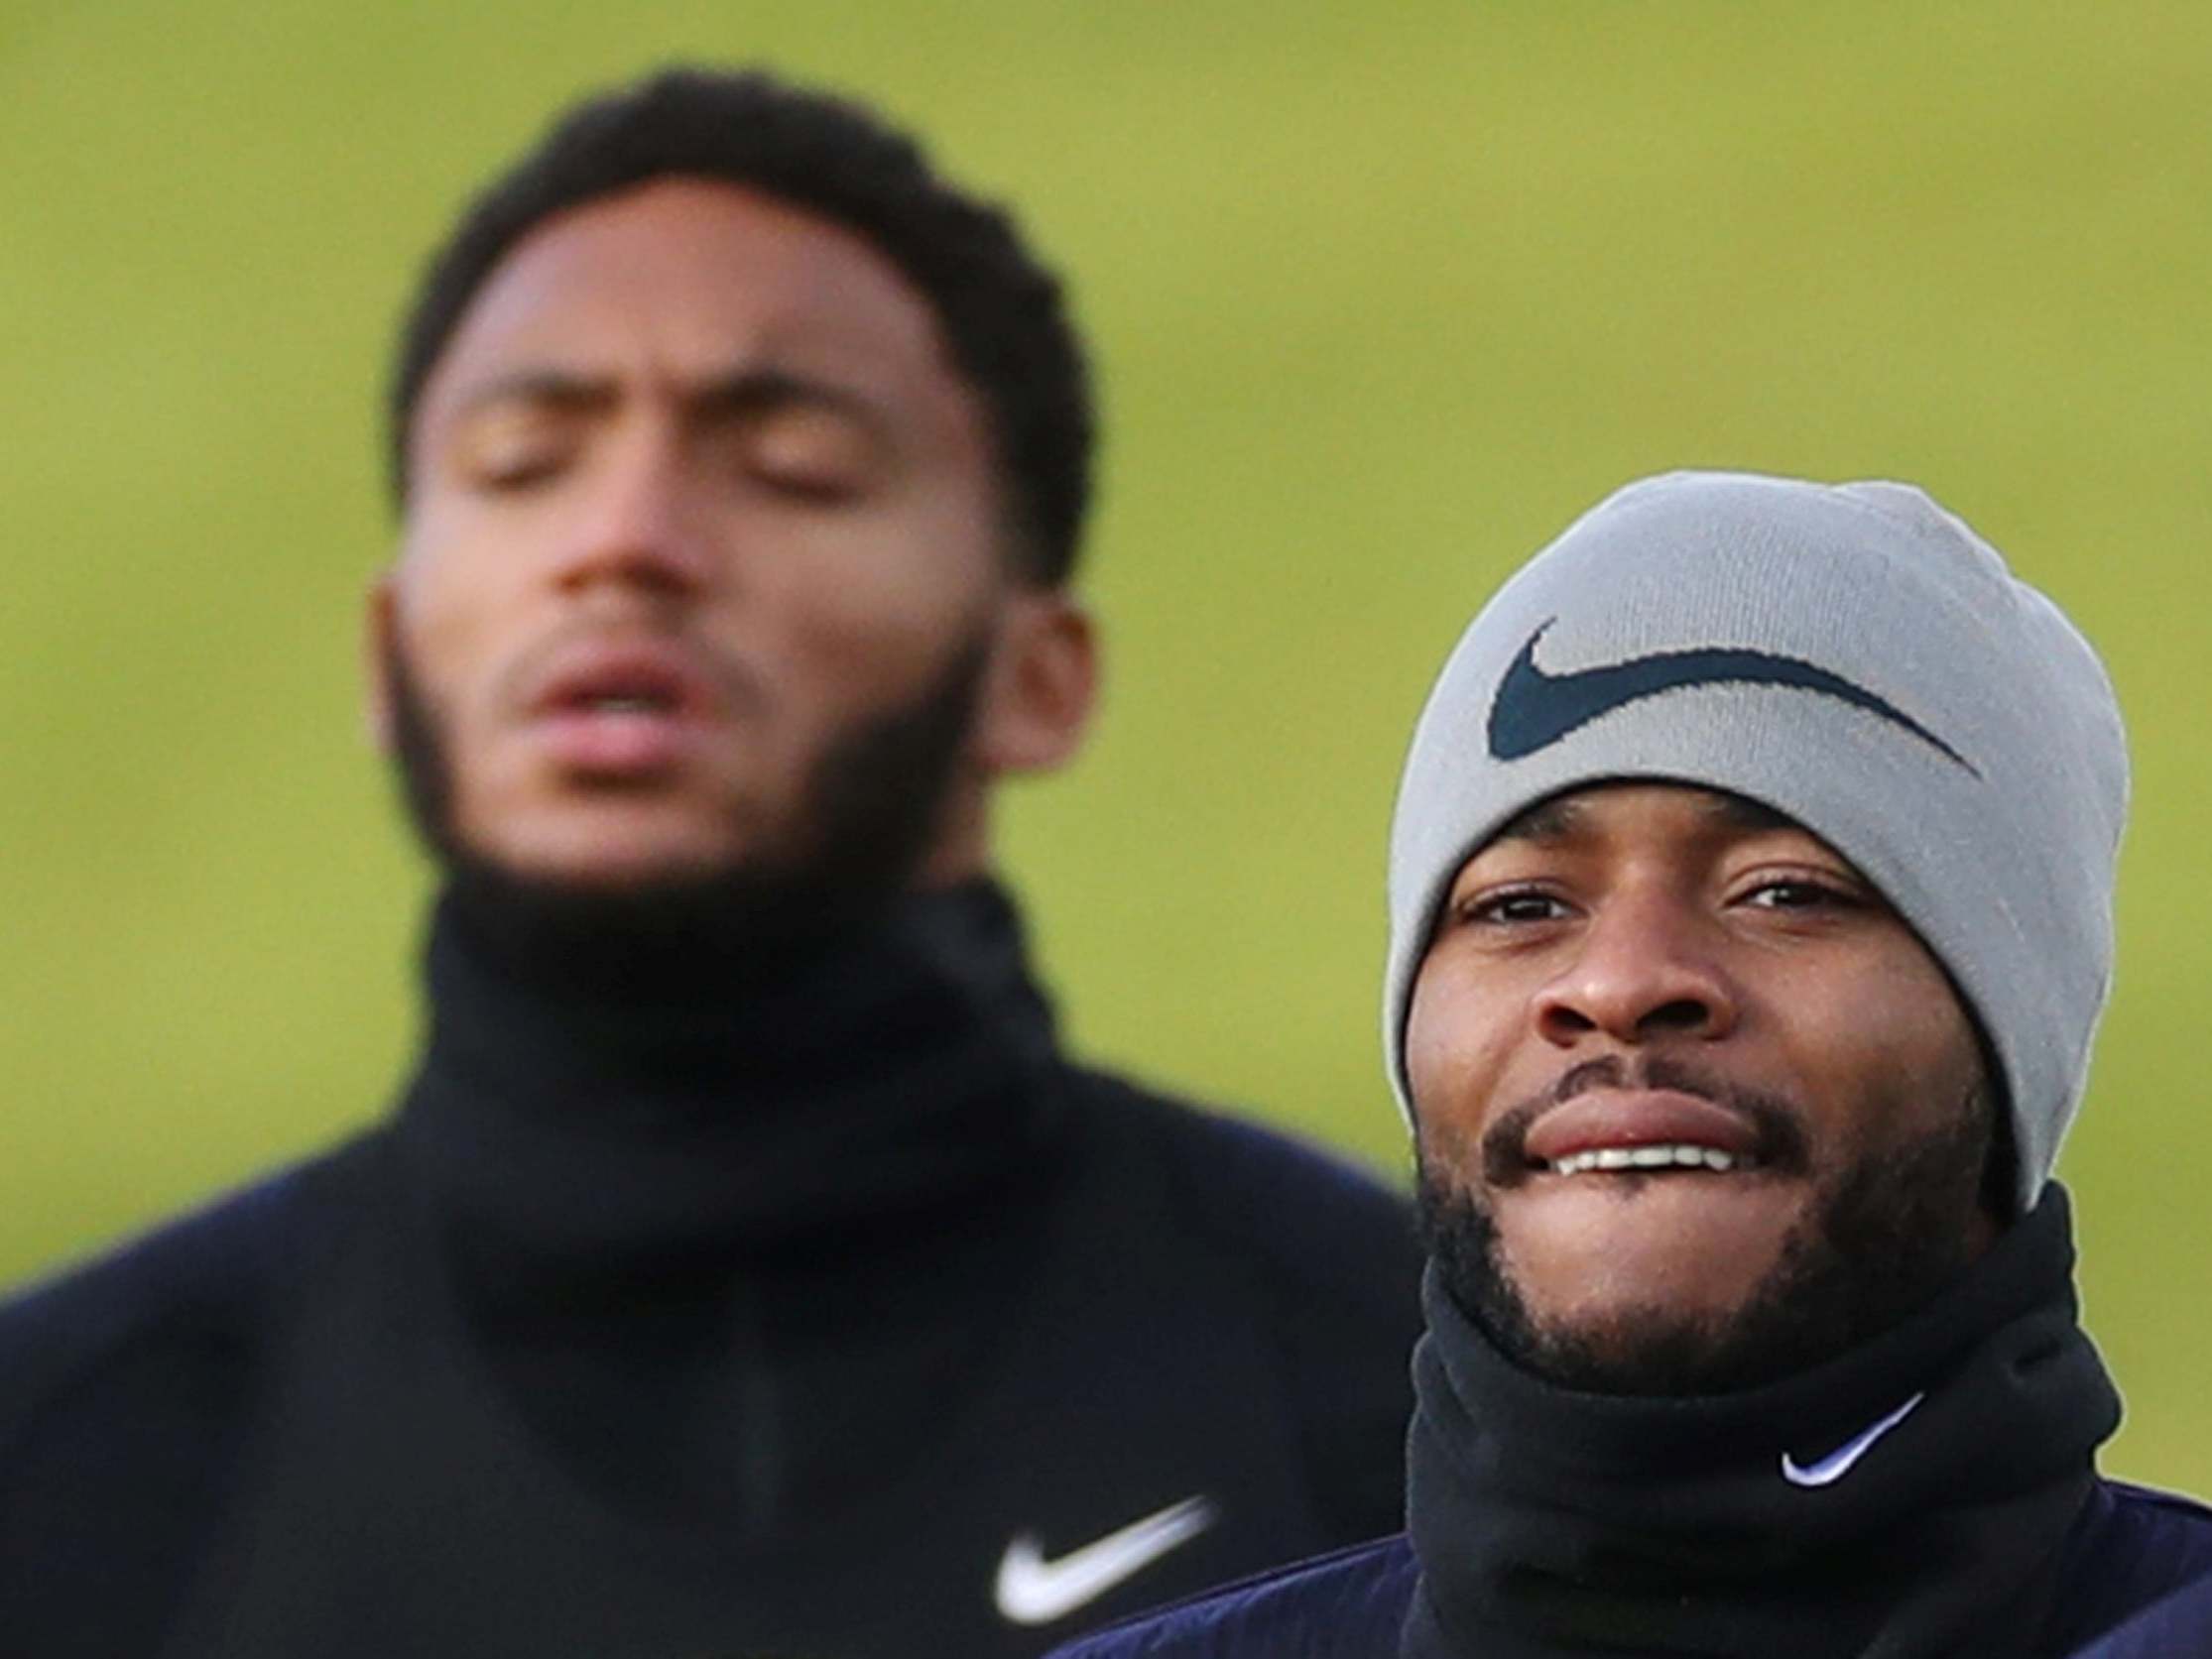 Raheem Sterling spoke to the players in the dressing room after the incident with Joe Gomez (Reuters)